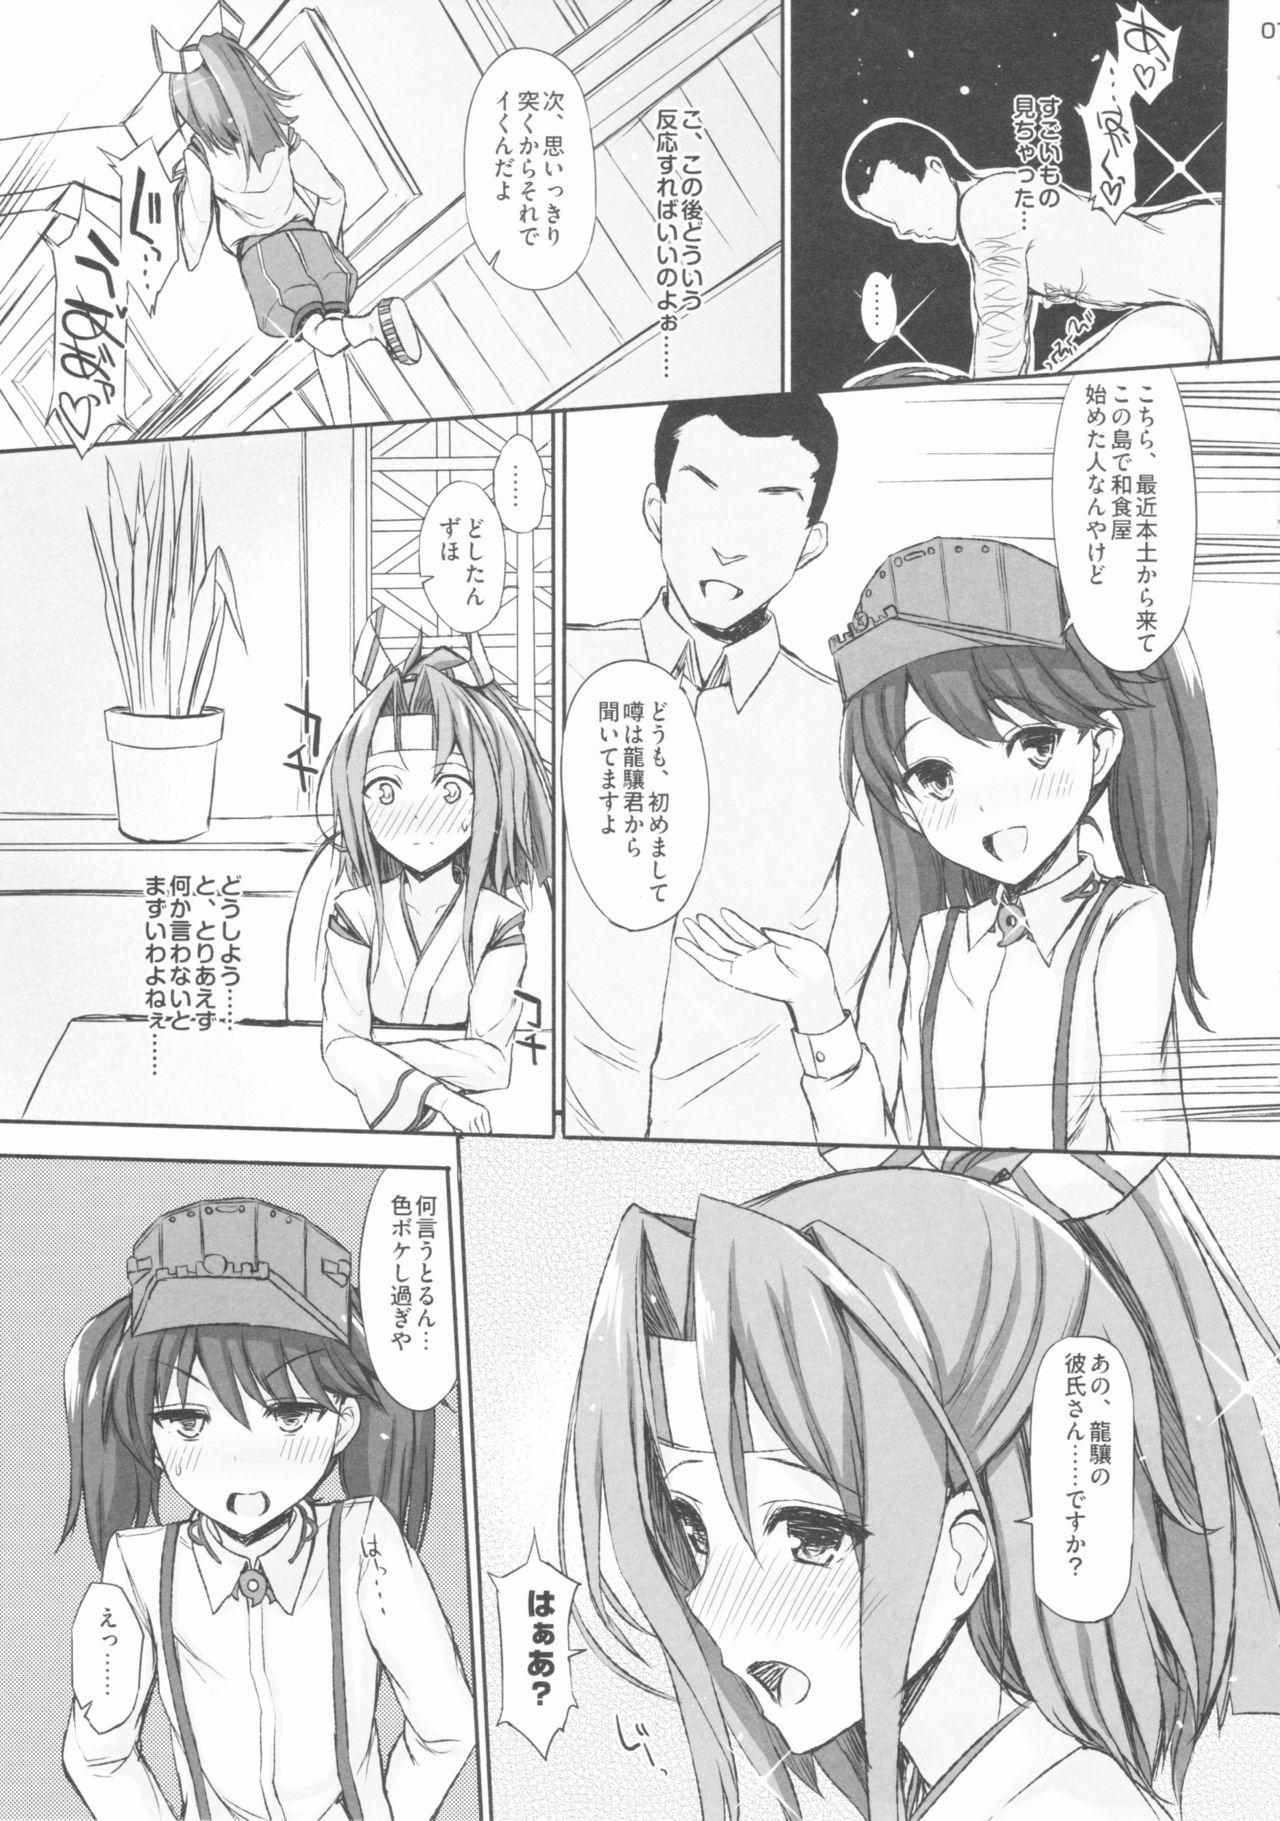 Coroa AND THEN NOTHING - Kantai collection Strange - Page 6